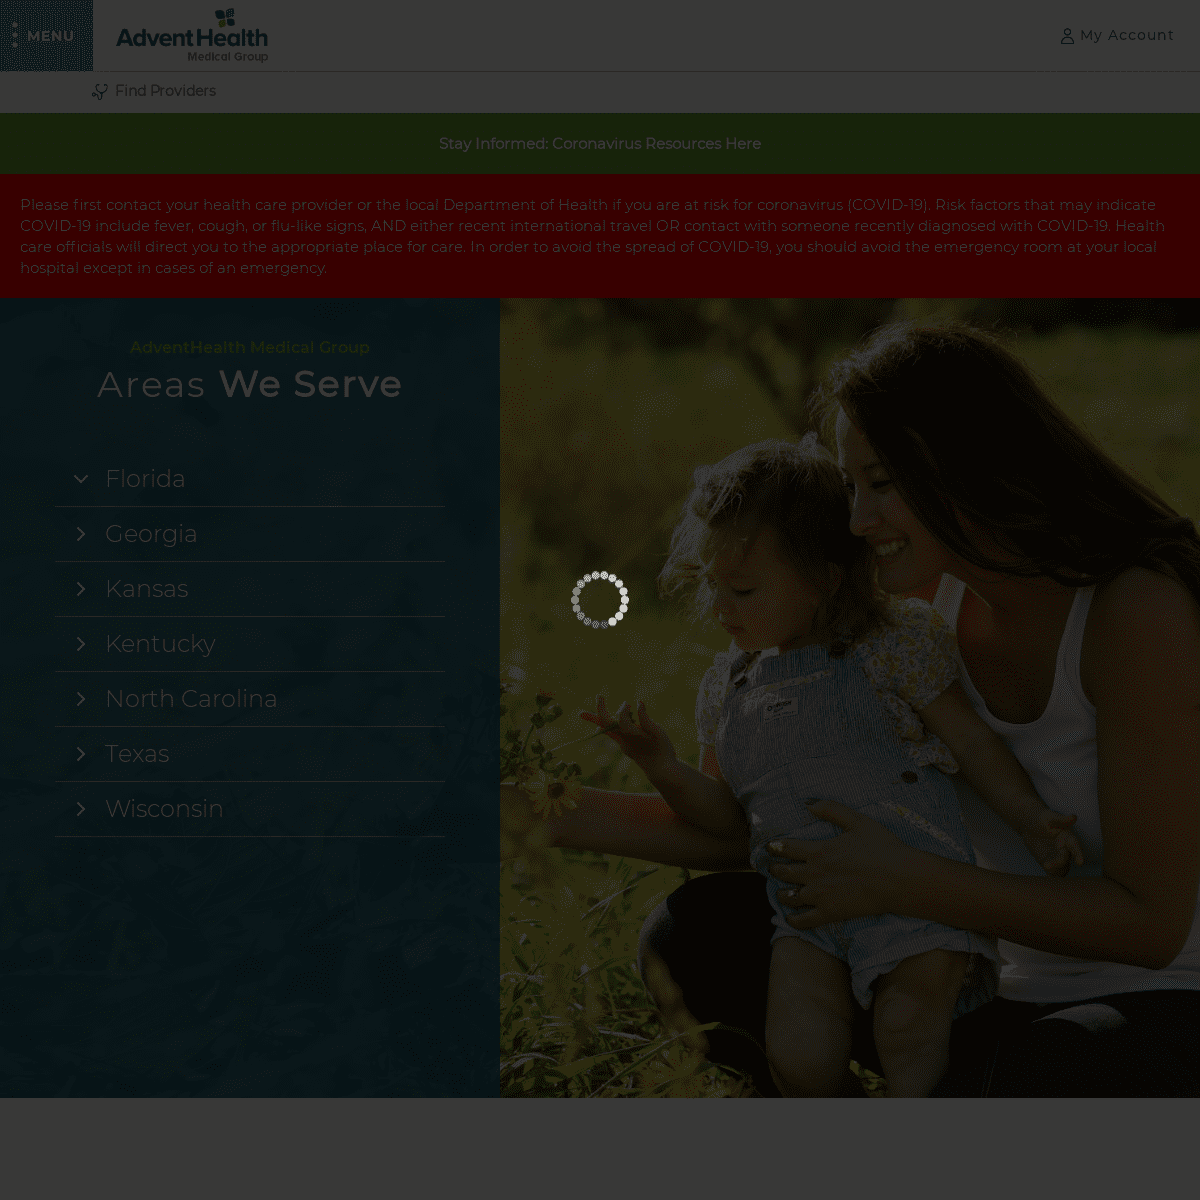 A complete backup of https://adventhealthmedicalgroup.com